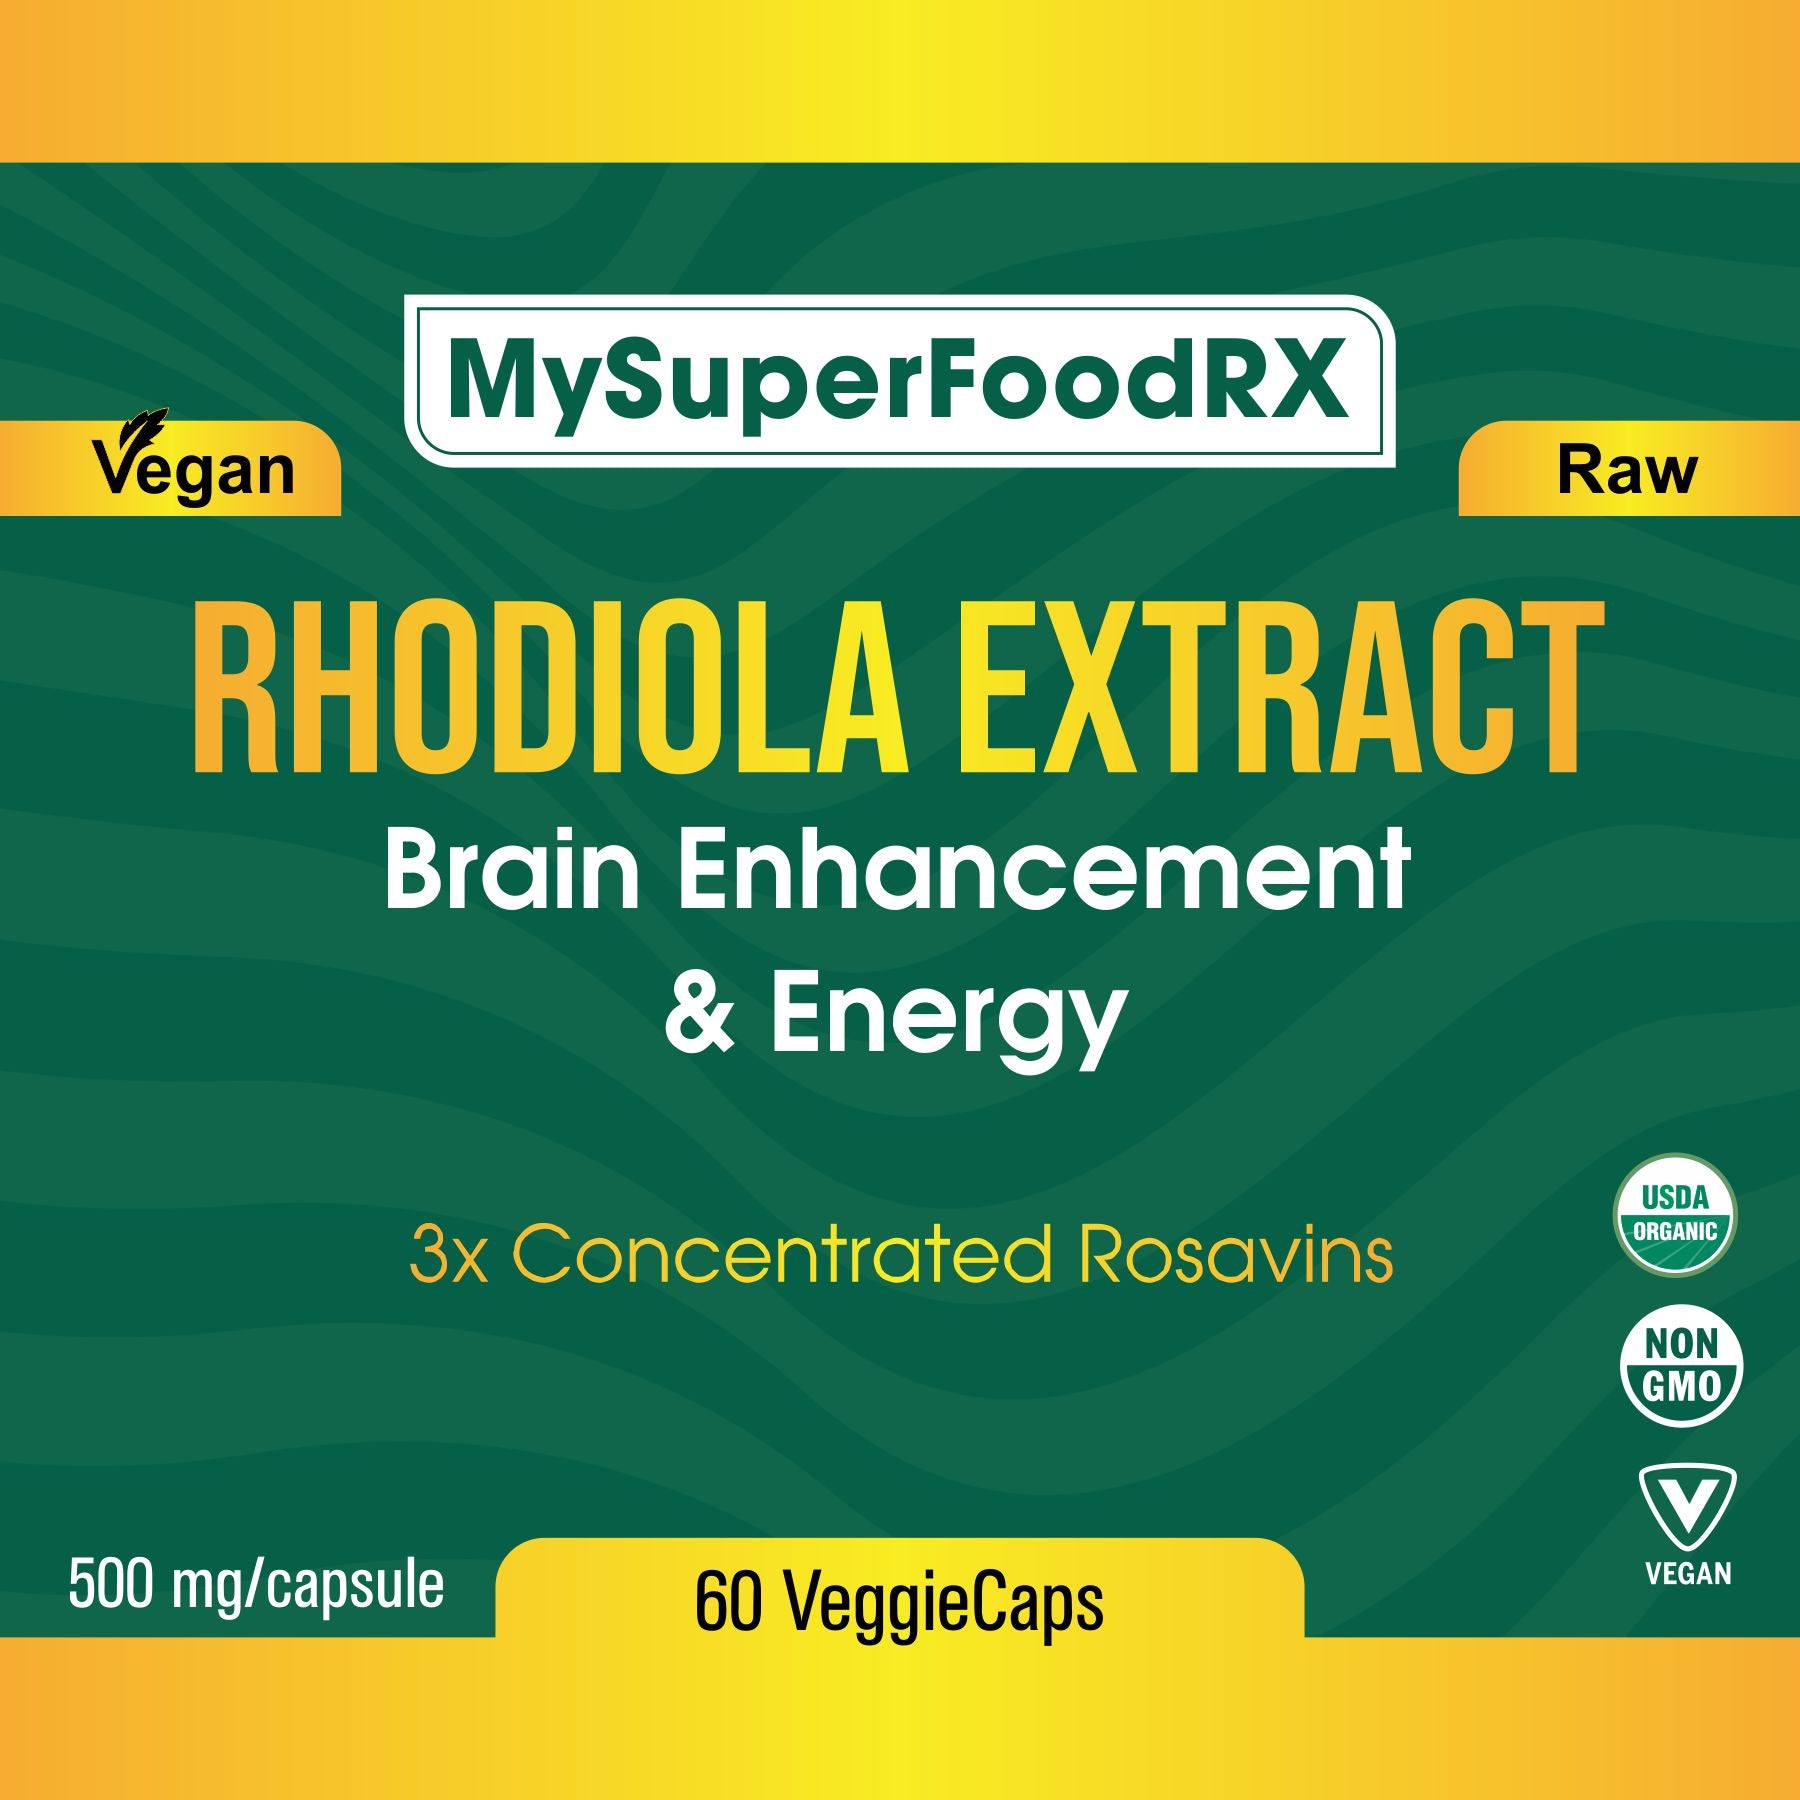 the label for my superfood rhodiola extract